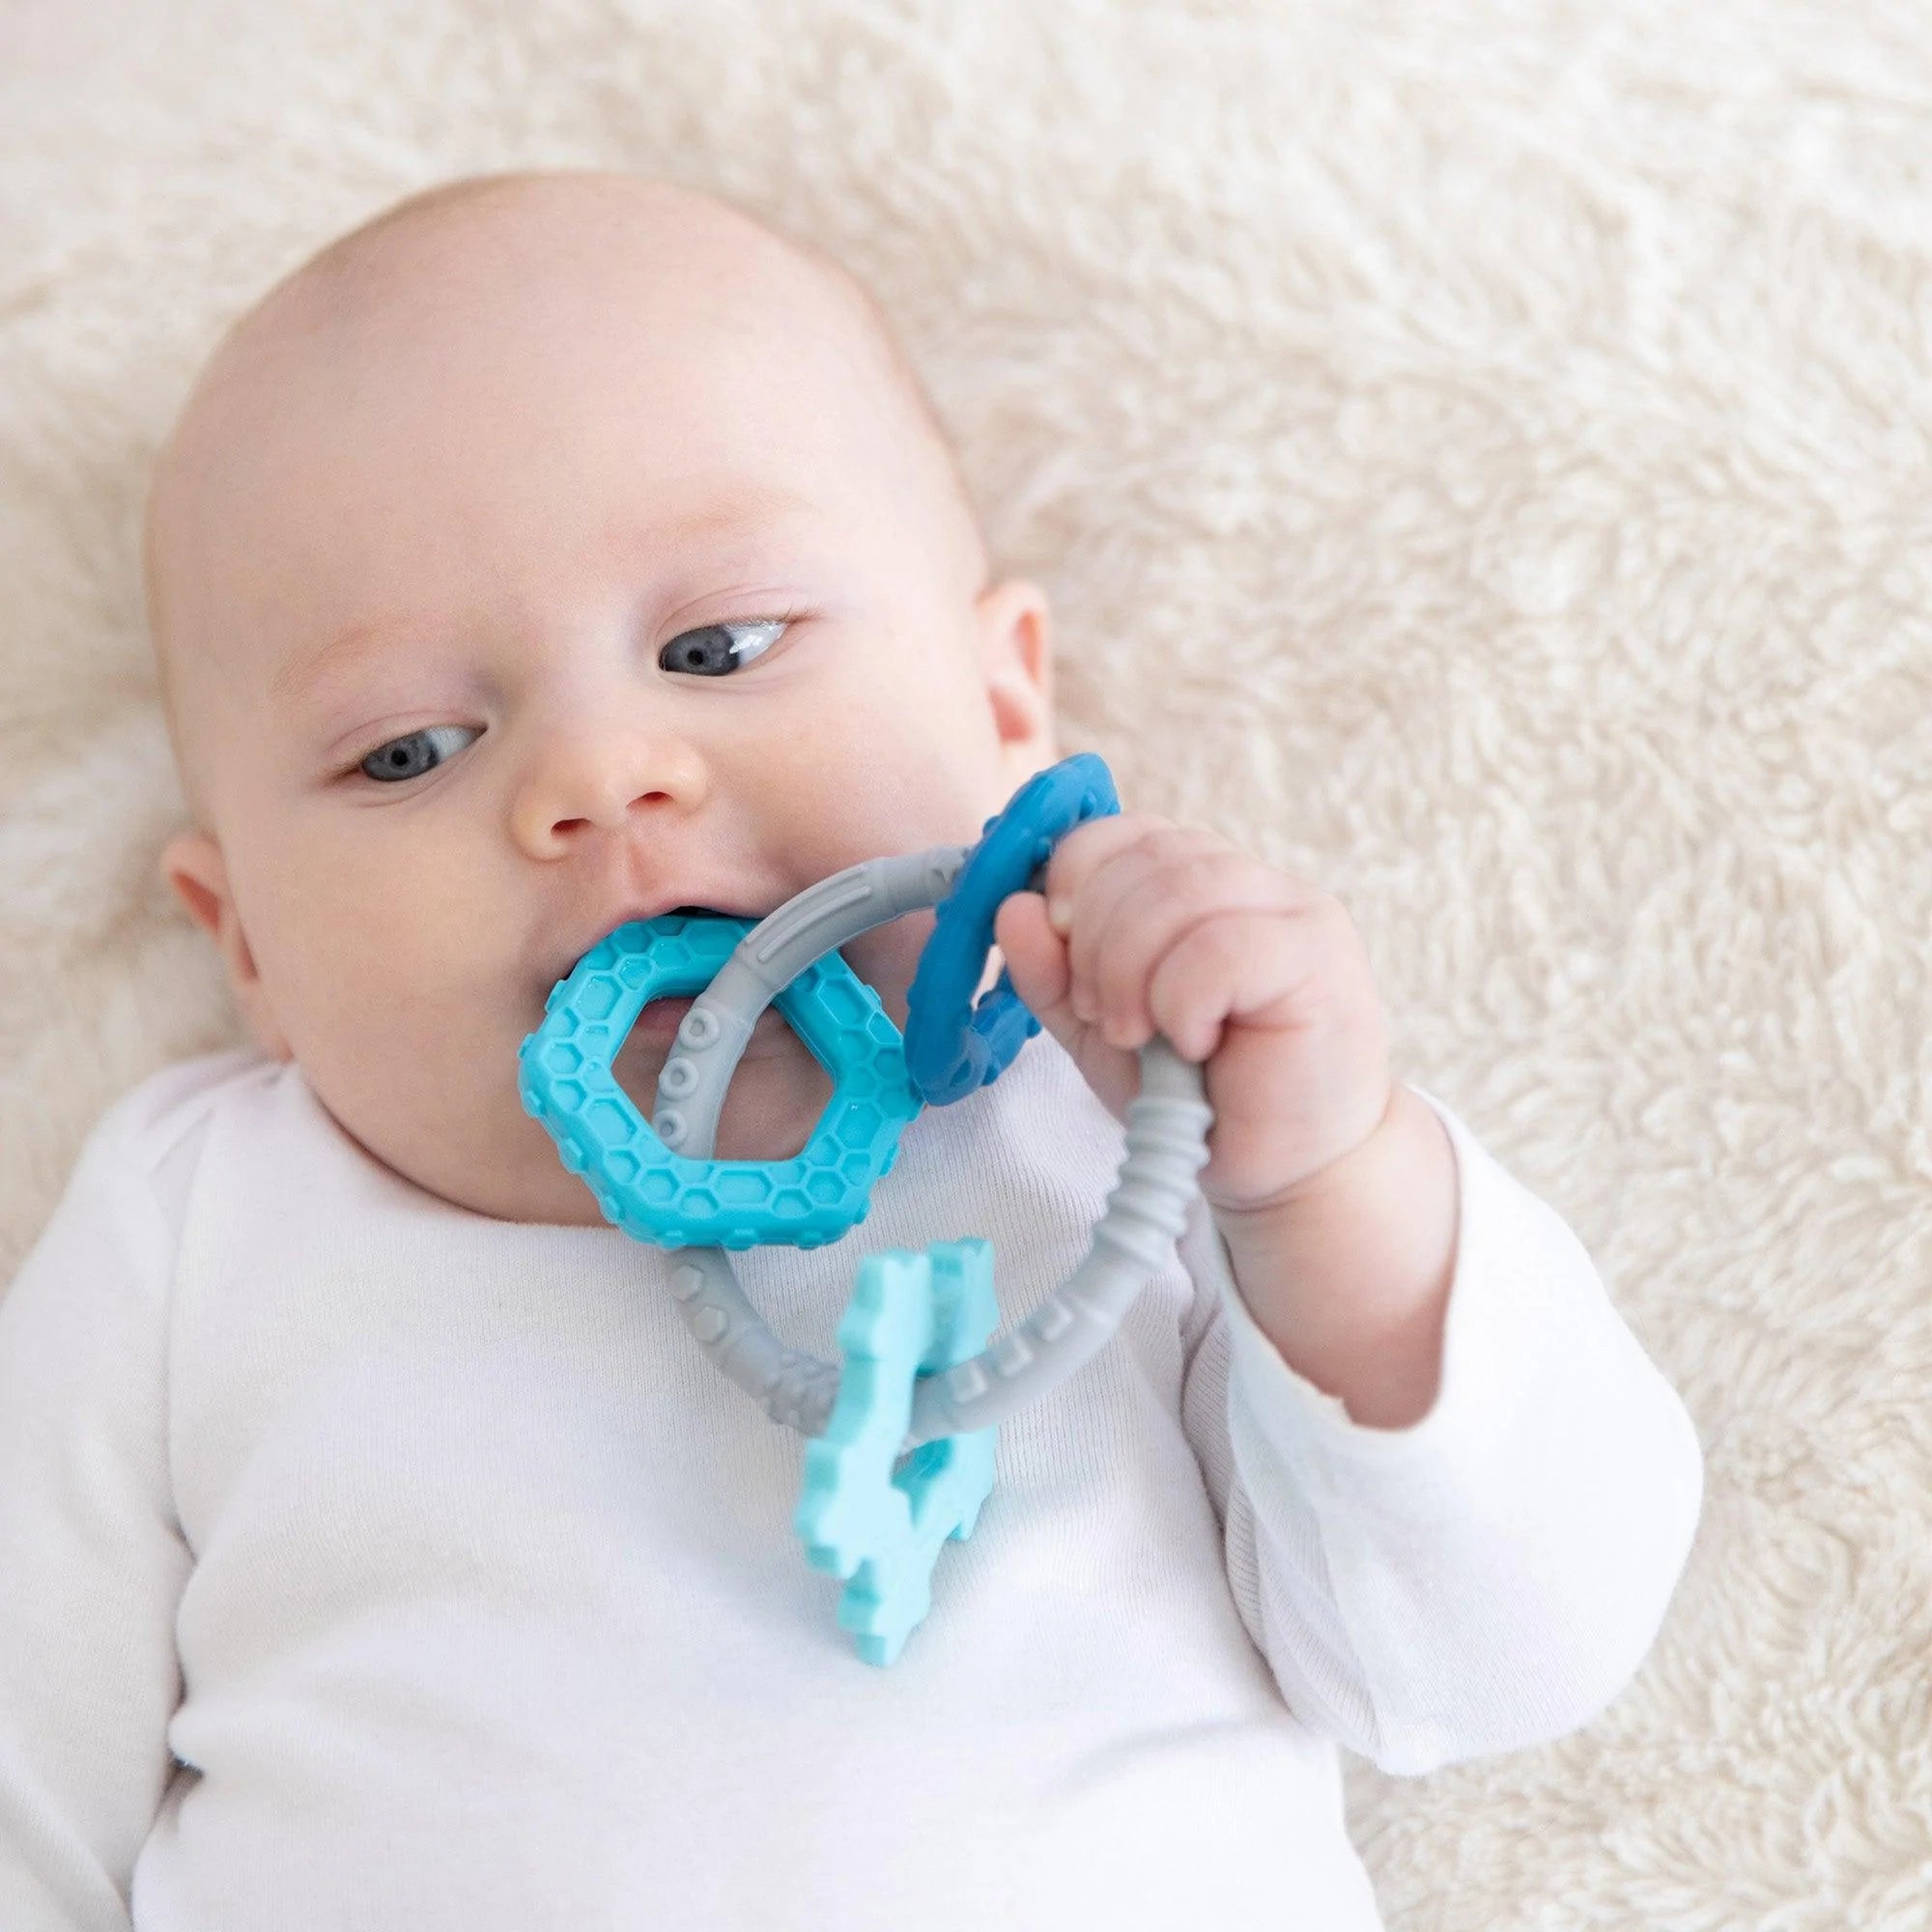 Silicone Teething Charms: Blue - Bumkins